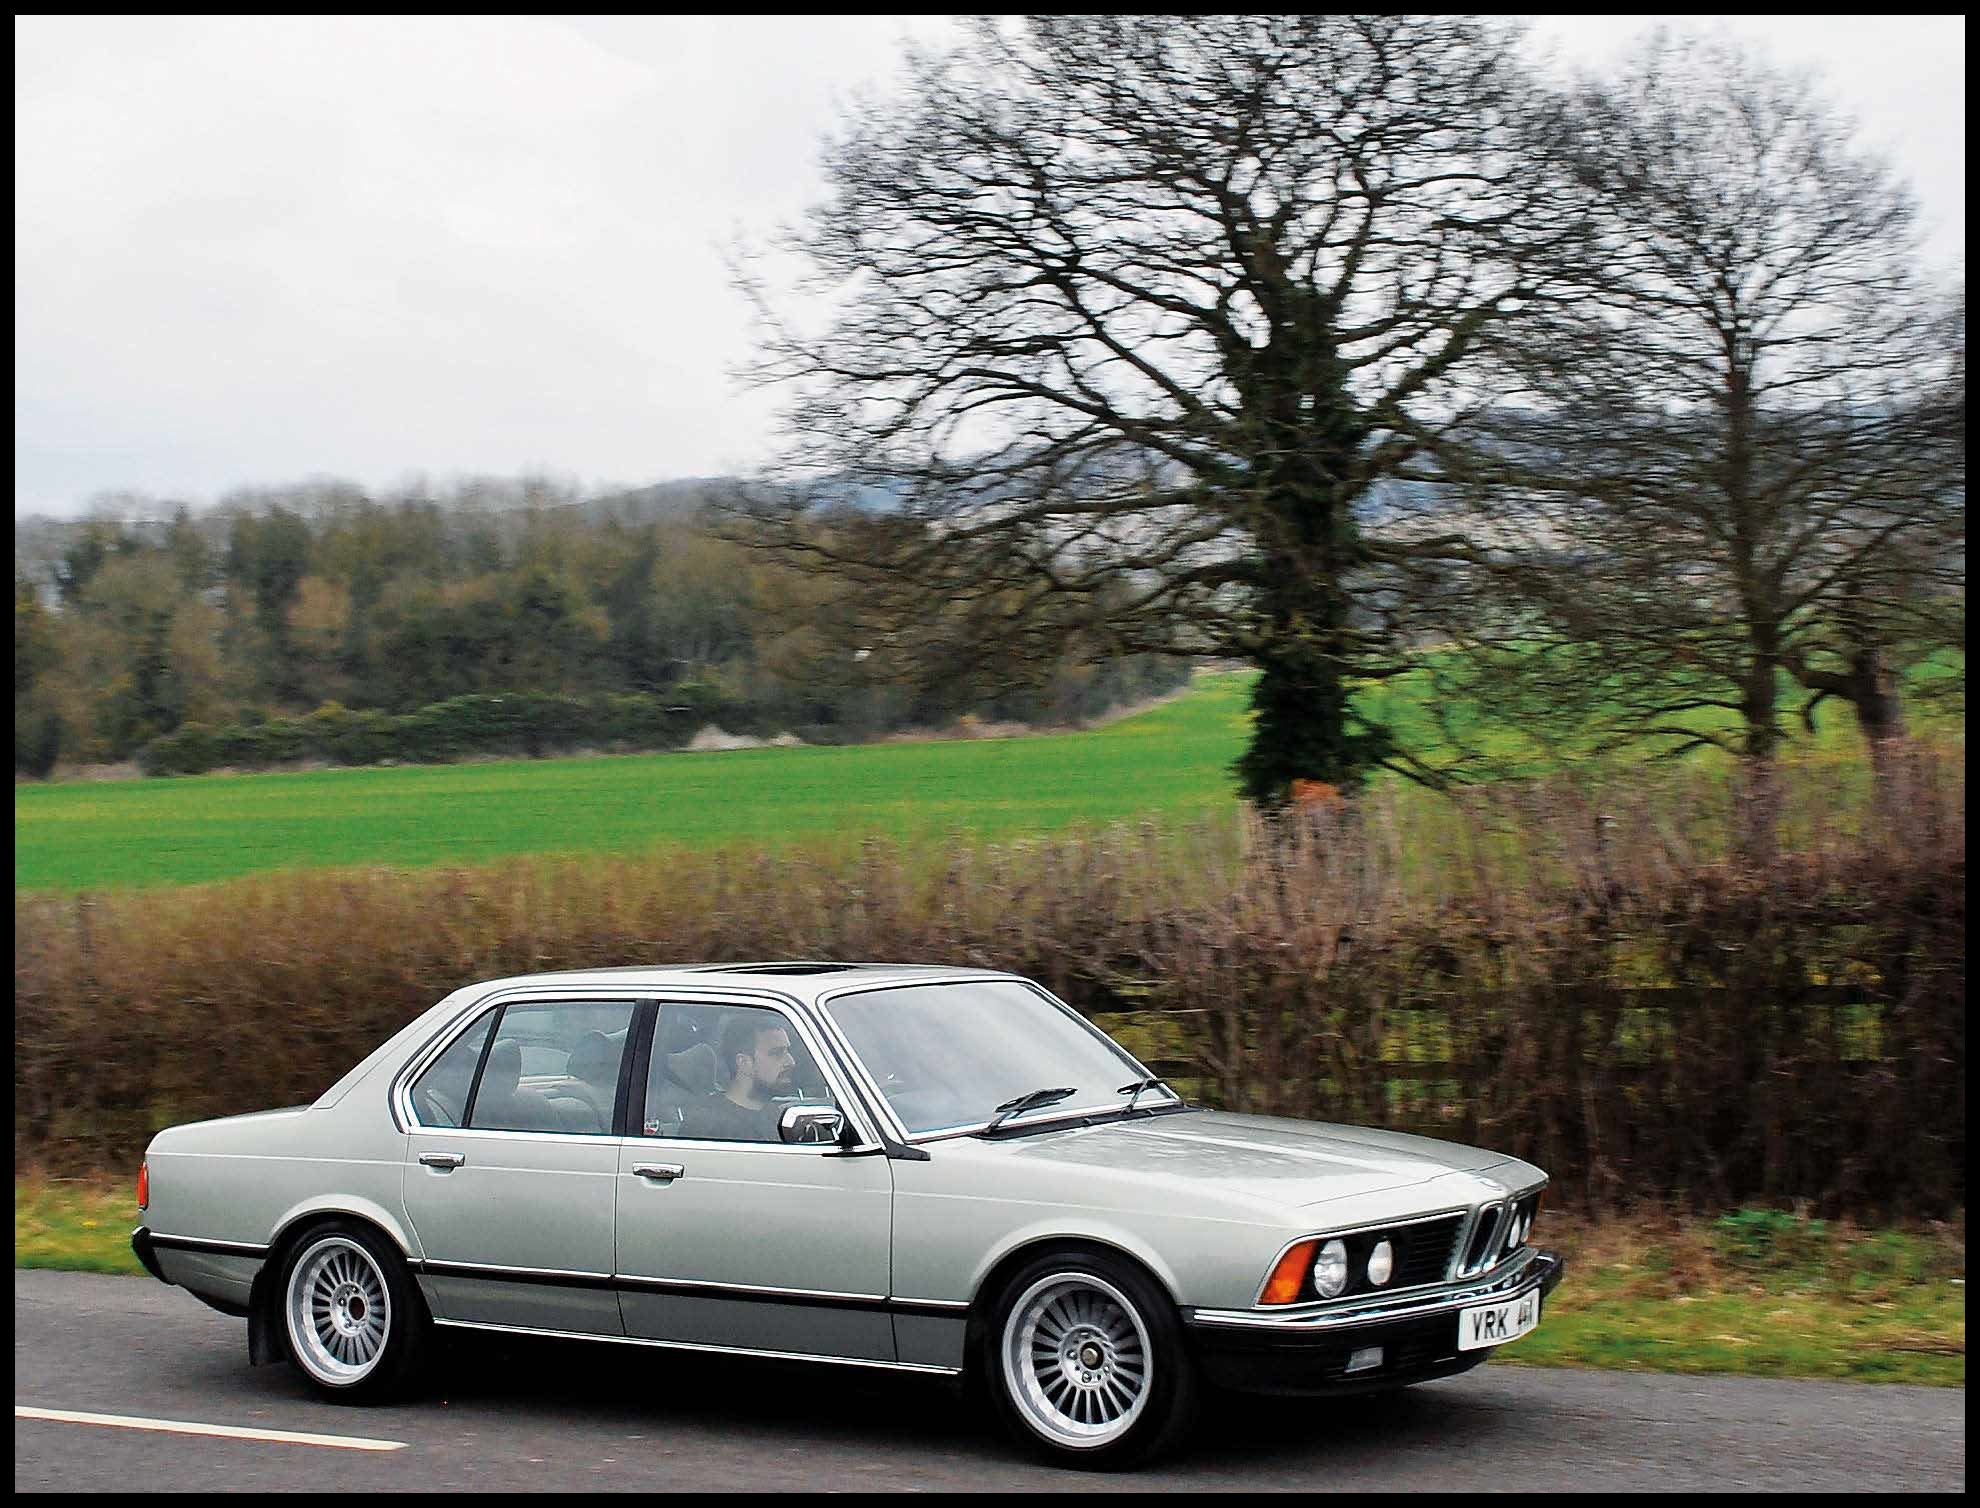 Me and my car 1981 BMW 735i Automatic E23 7 Series